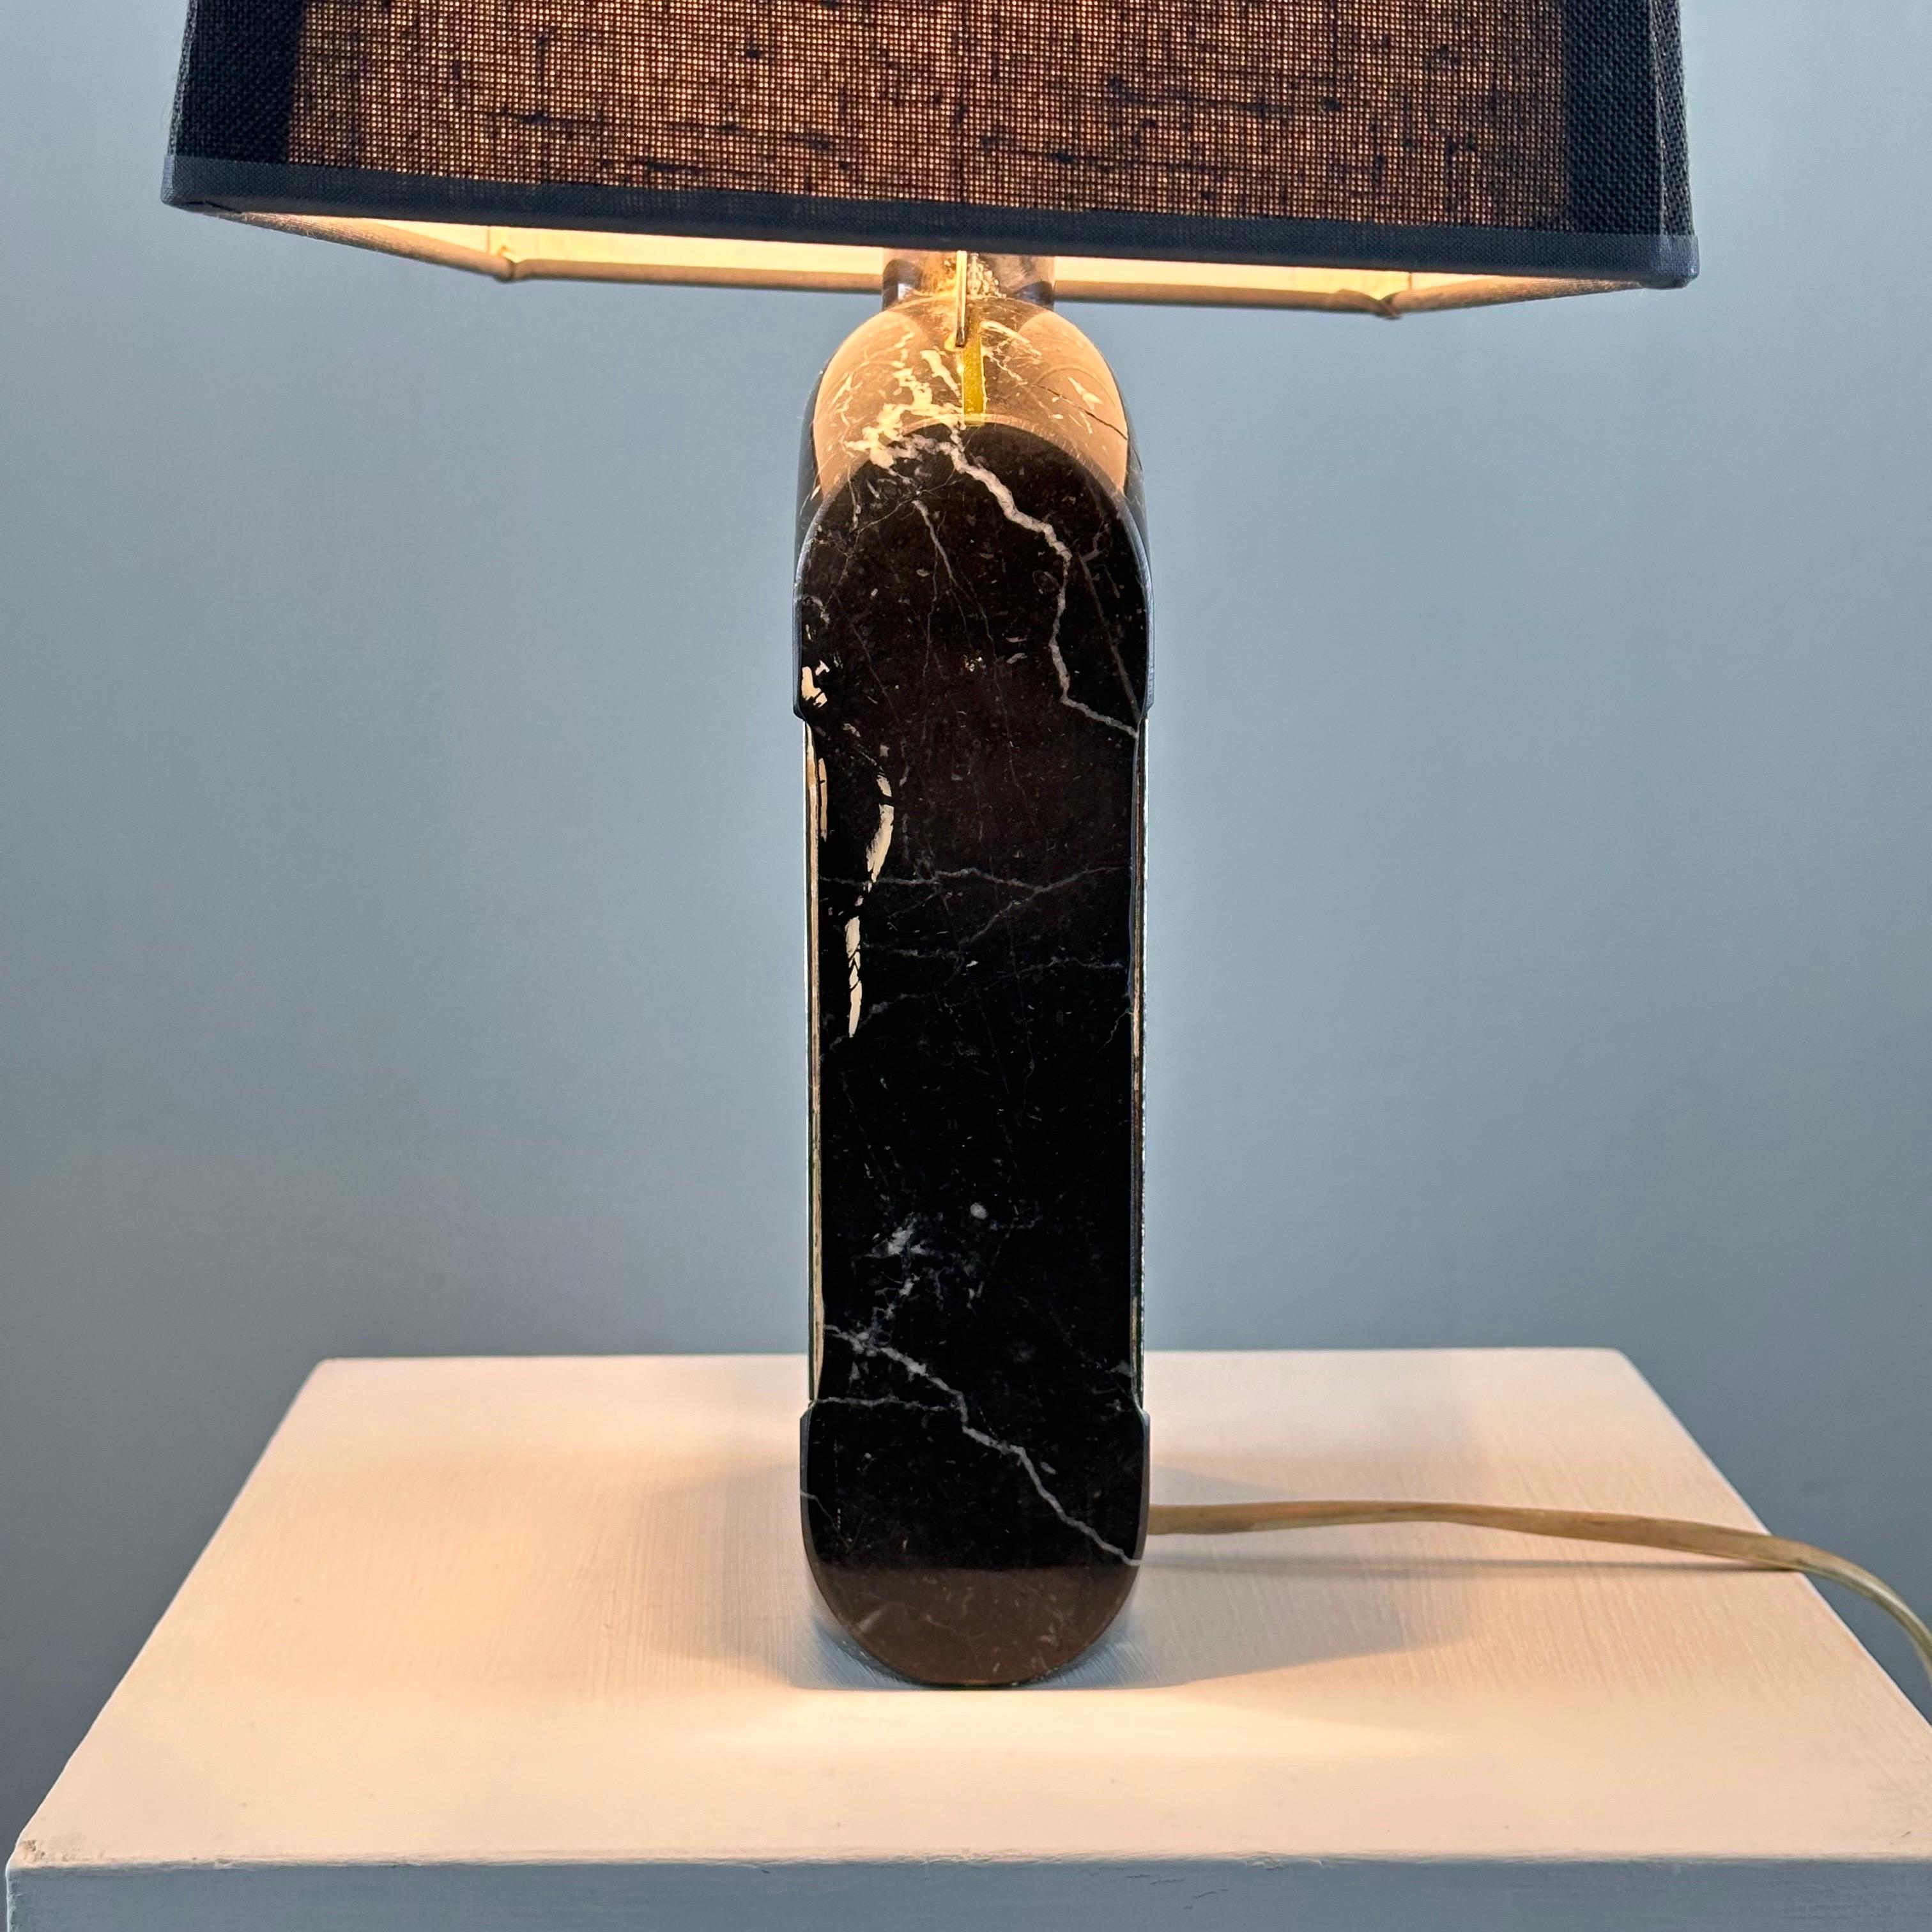 Vintage Italian Table Lamp in Black Portovenere Marble and Silver Plate, 1970s For Sale 12